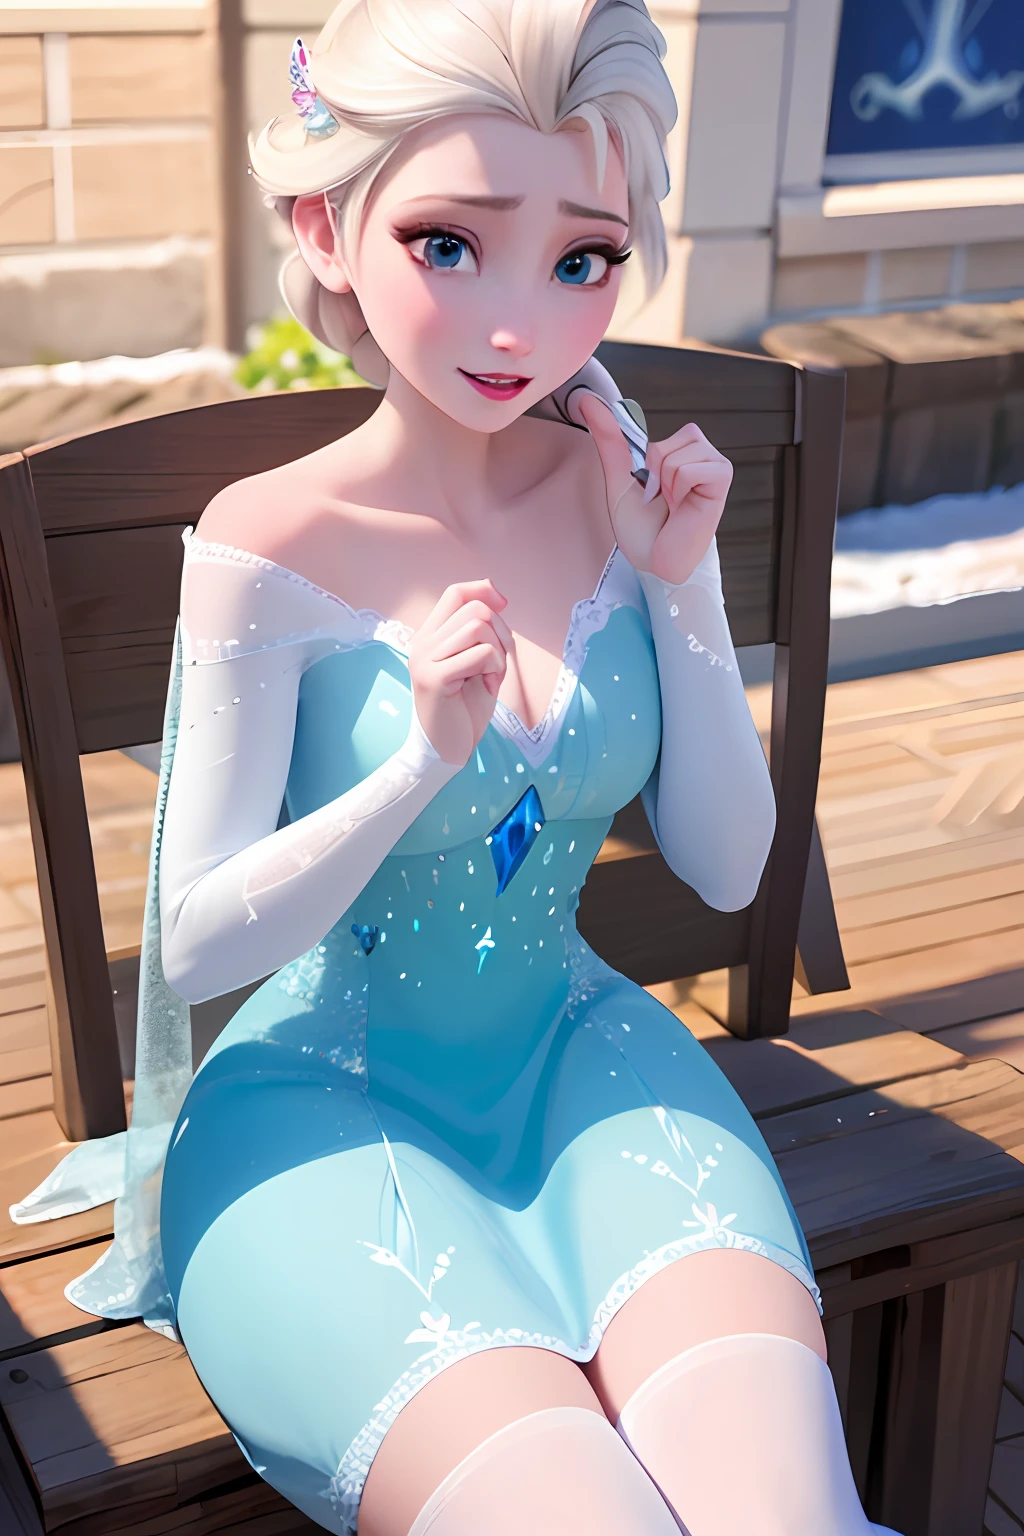 (masterpiece:1.4), (best qualit:1.4), (high resolution:1.4), a woman in a blue dress sitting on a snow covered ground, elsa frozen, elsa, elsa from frozen, rule 34, disney render, cgi animated, beautiful elsa, portrait of elsa from frozen, anime barbie in white stockings, belle delphine, disney artist, high definition anime art, frozen ii movie still, better known as amouranth